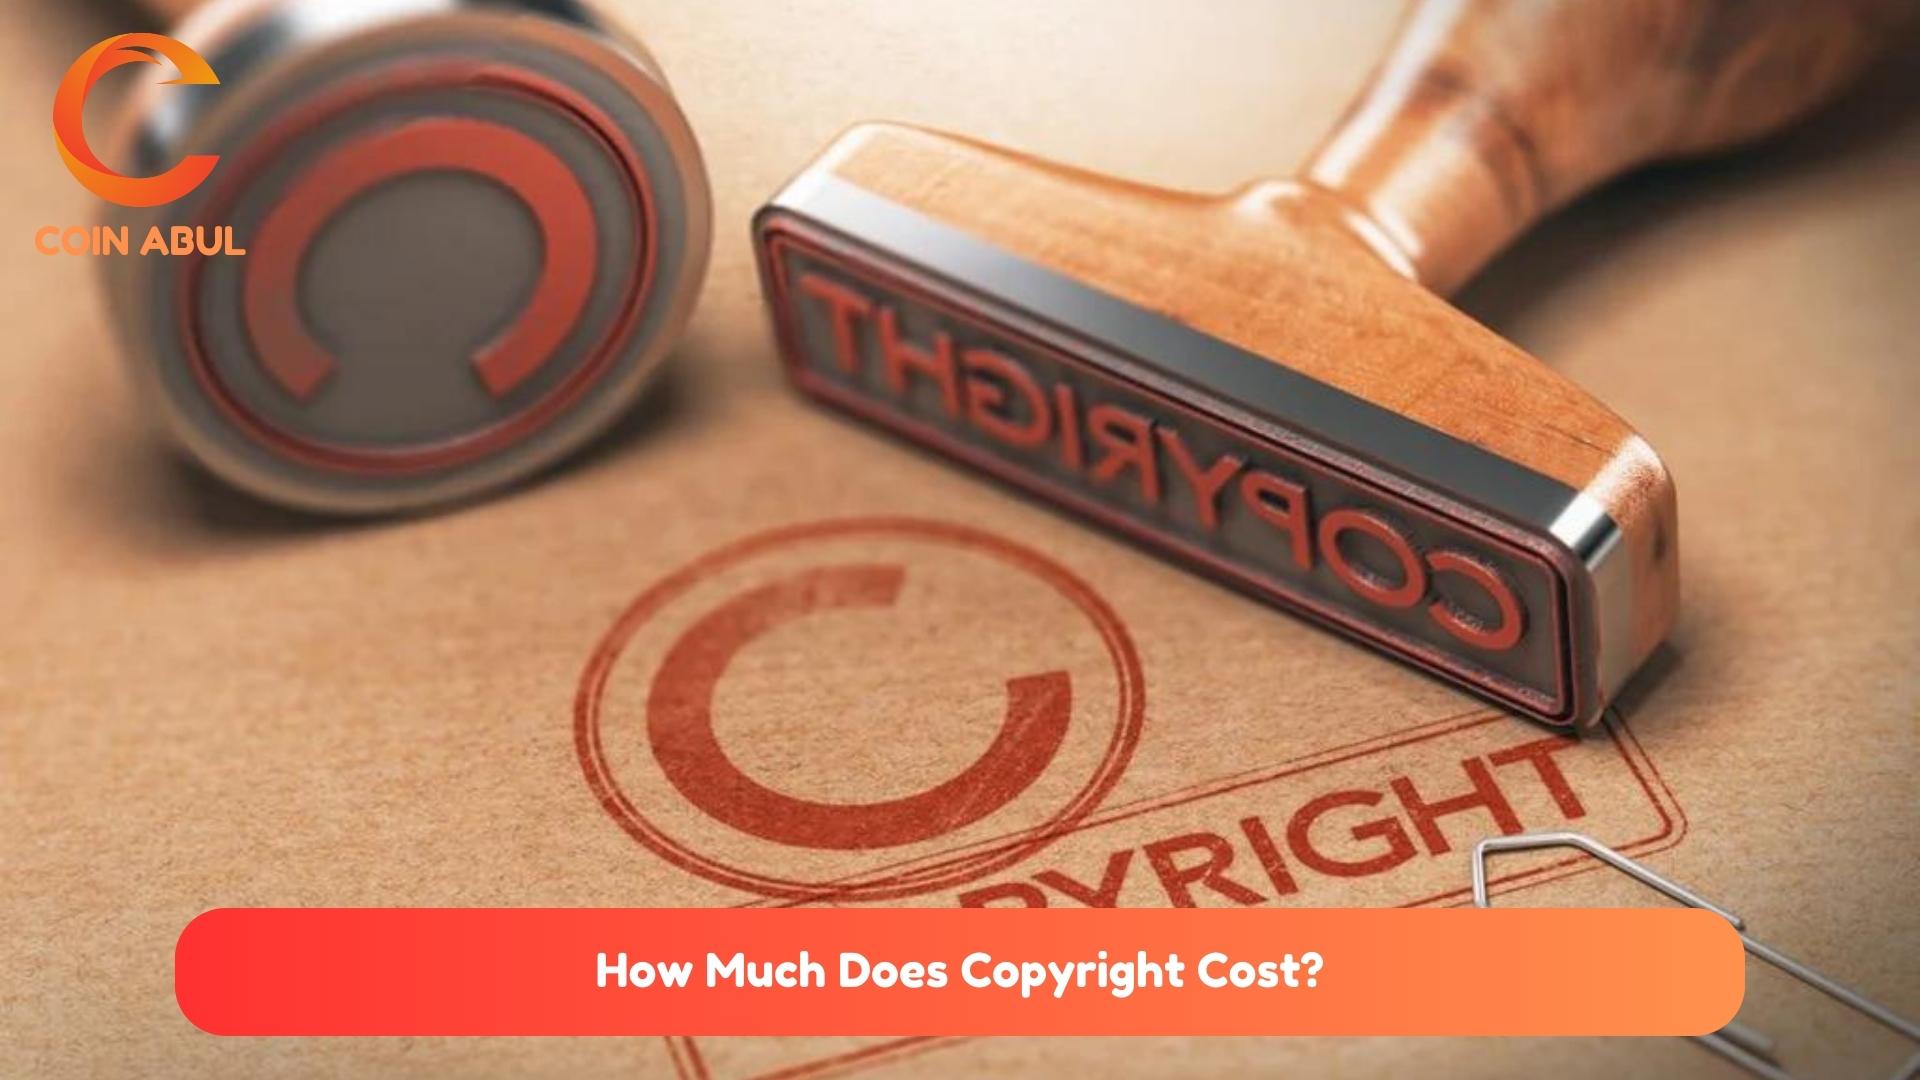 How Much Does Copyright Cost